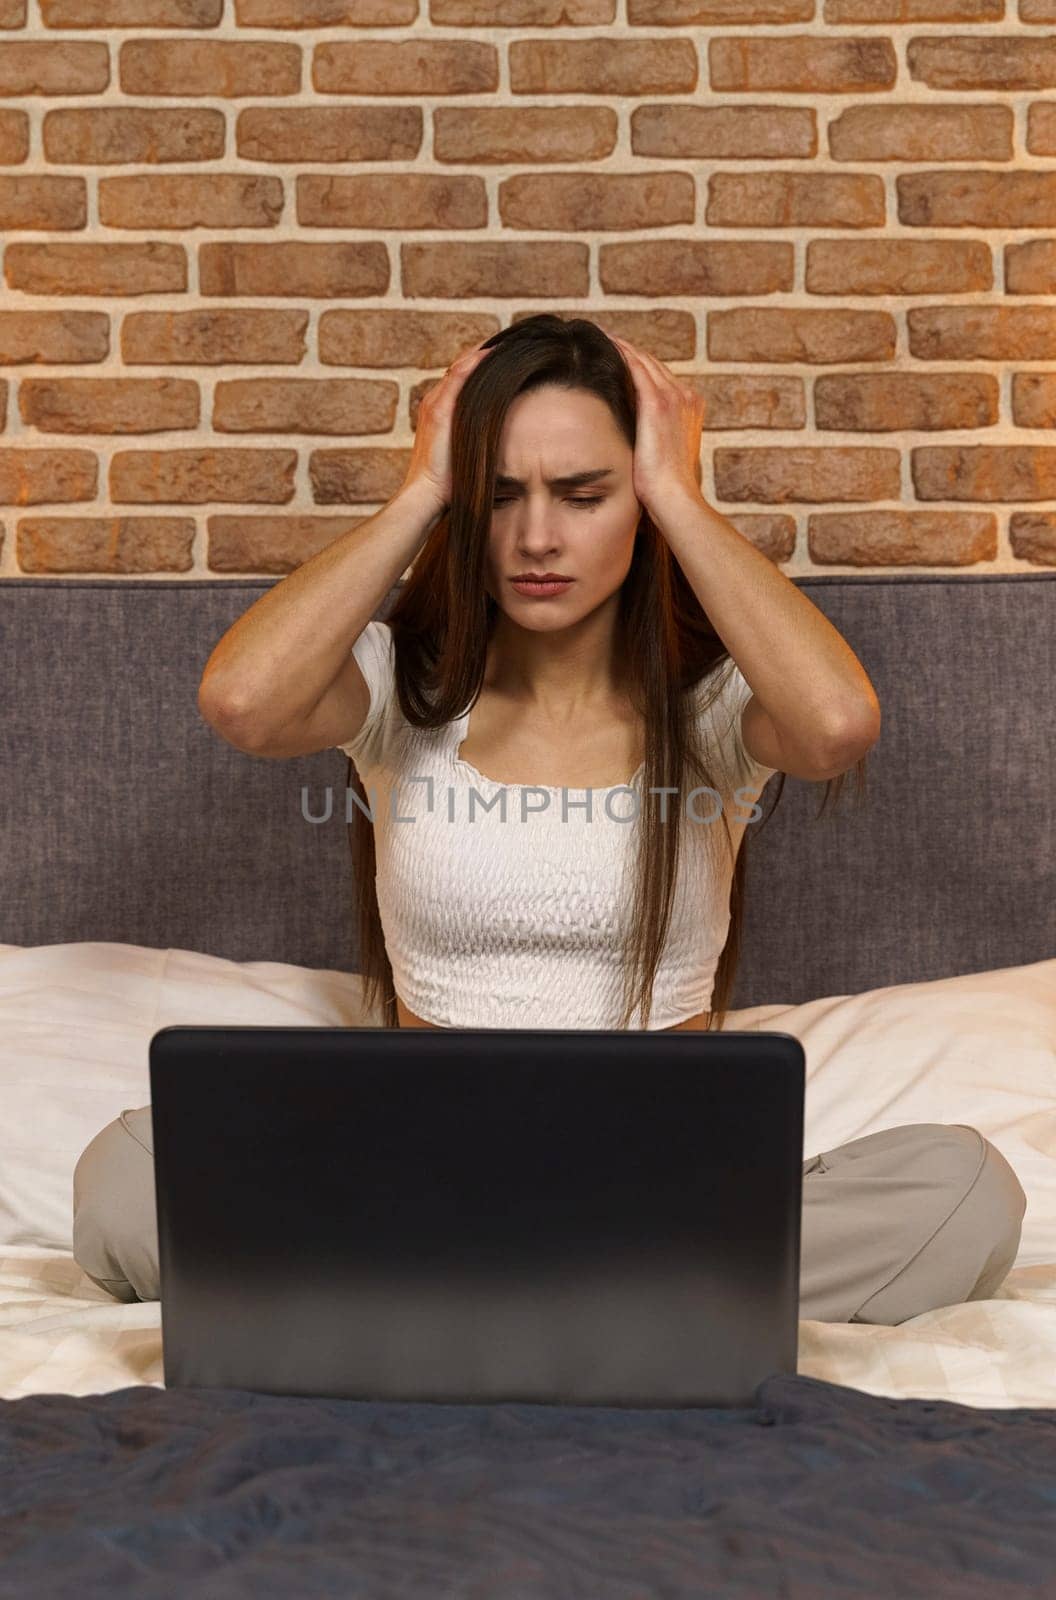 Young business woman with a headache, uses a laptop, works late at night on the bed. Vertical frame.